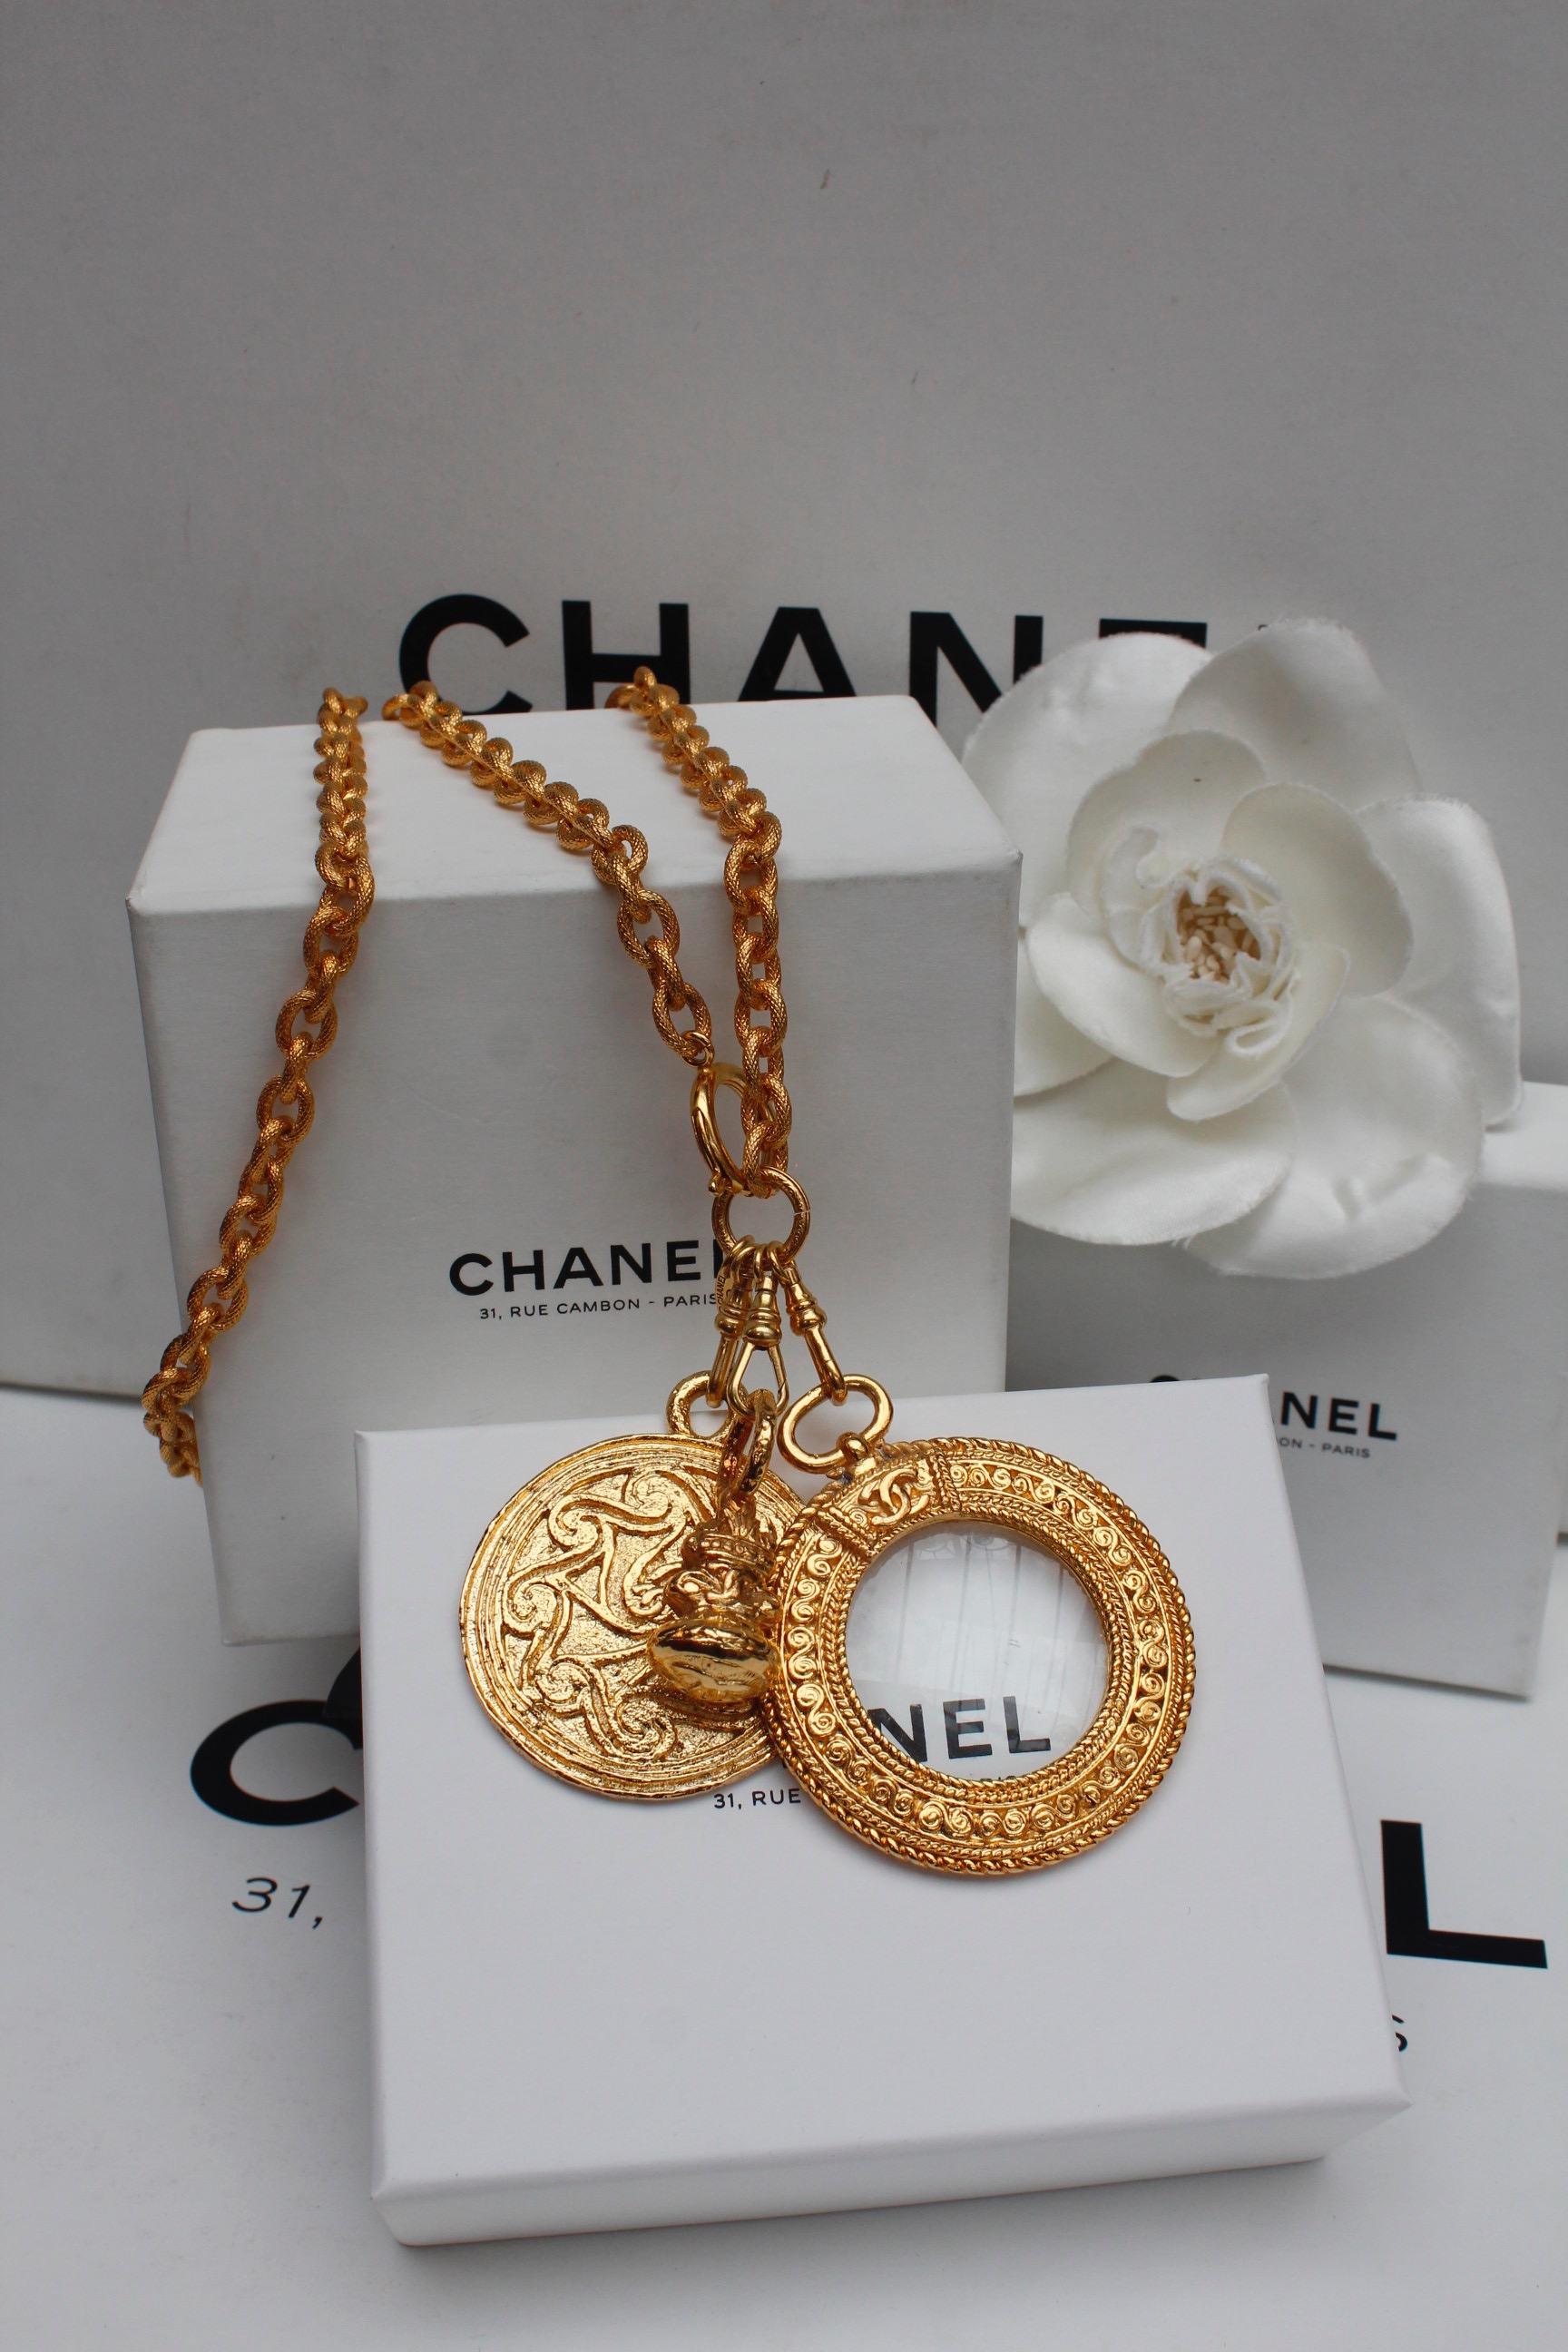 CHANEL (Made in France)

Nice gilted metal chain necklace adorned with a coin, a seal and a magnifying glass pendants in a Byzantine inspiration.

Signed on a plate next to the clasp.

From the 1990s.

Length : 33 in - Maximum pendant's length: 3.5